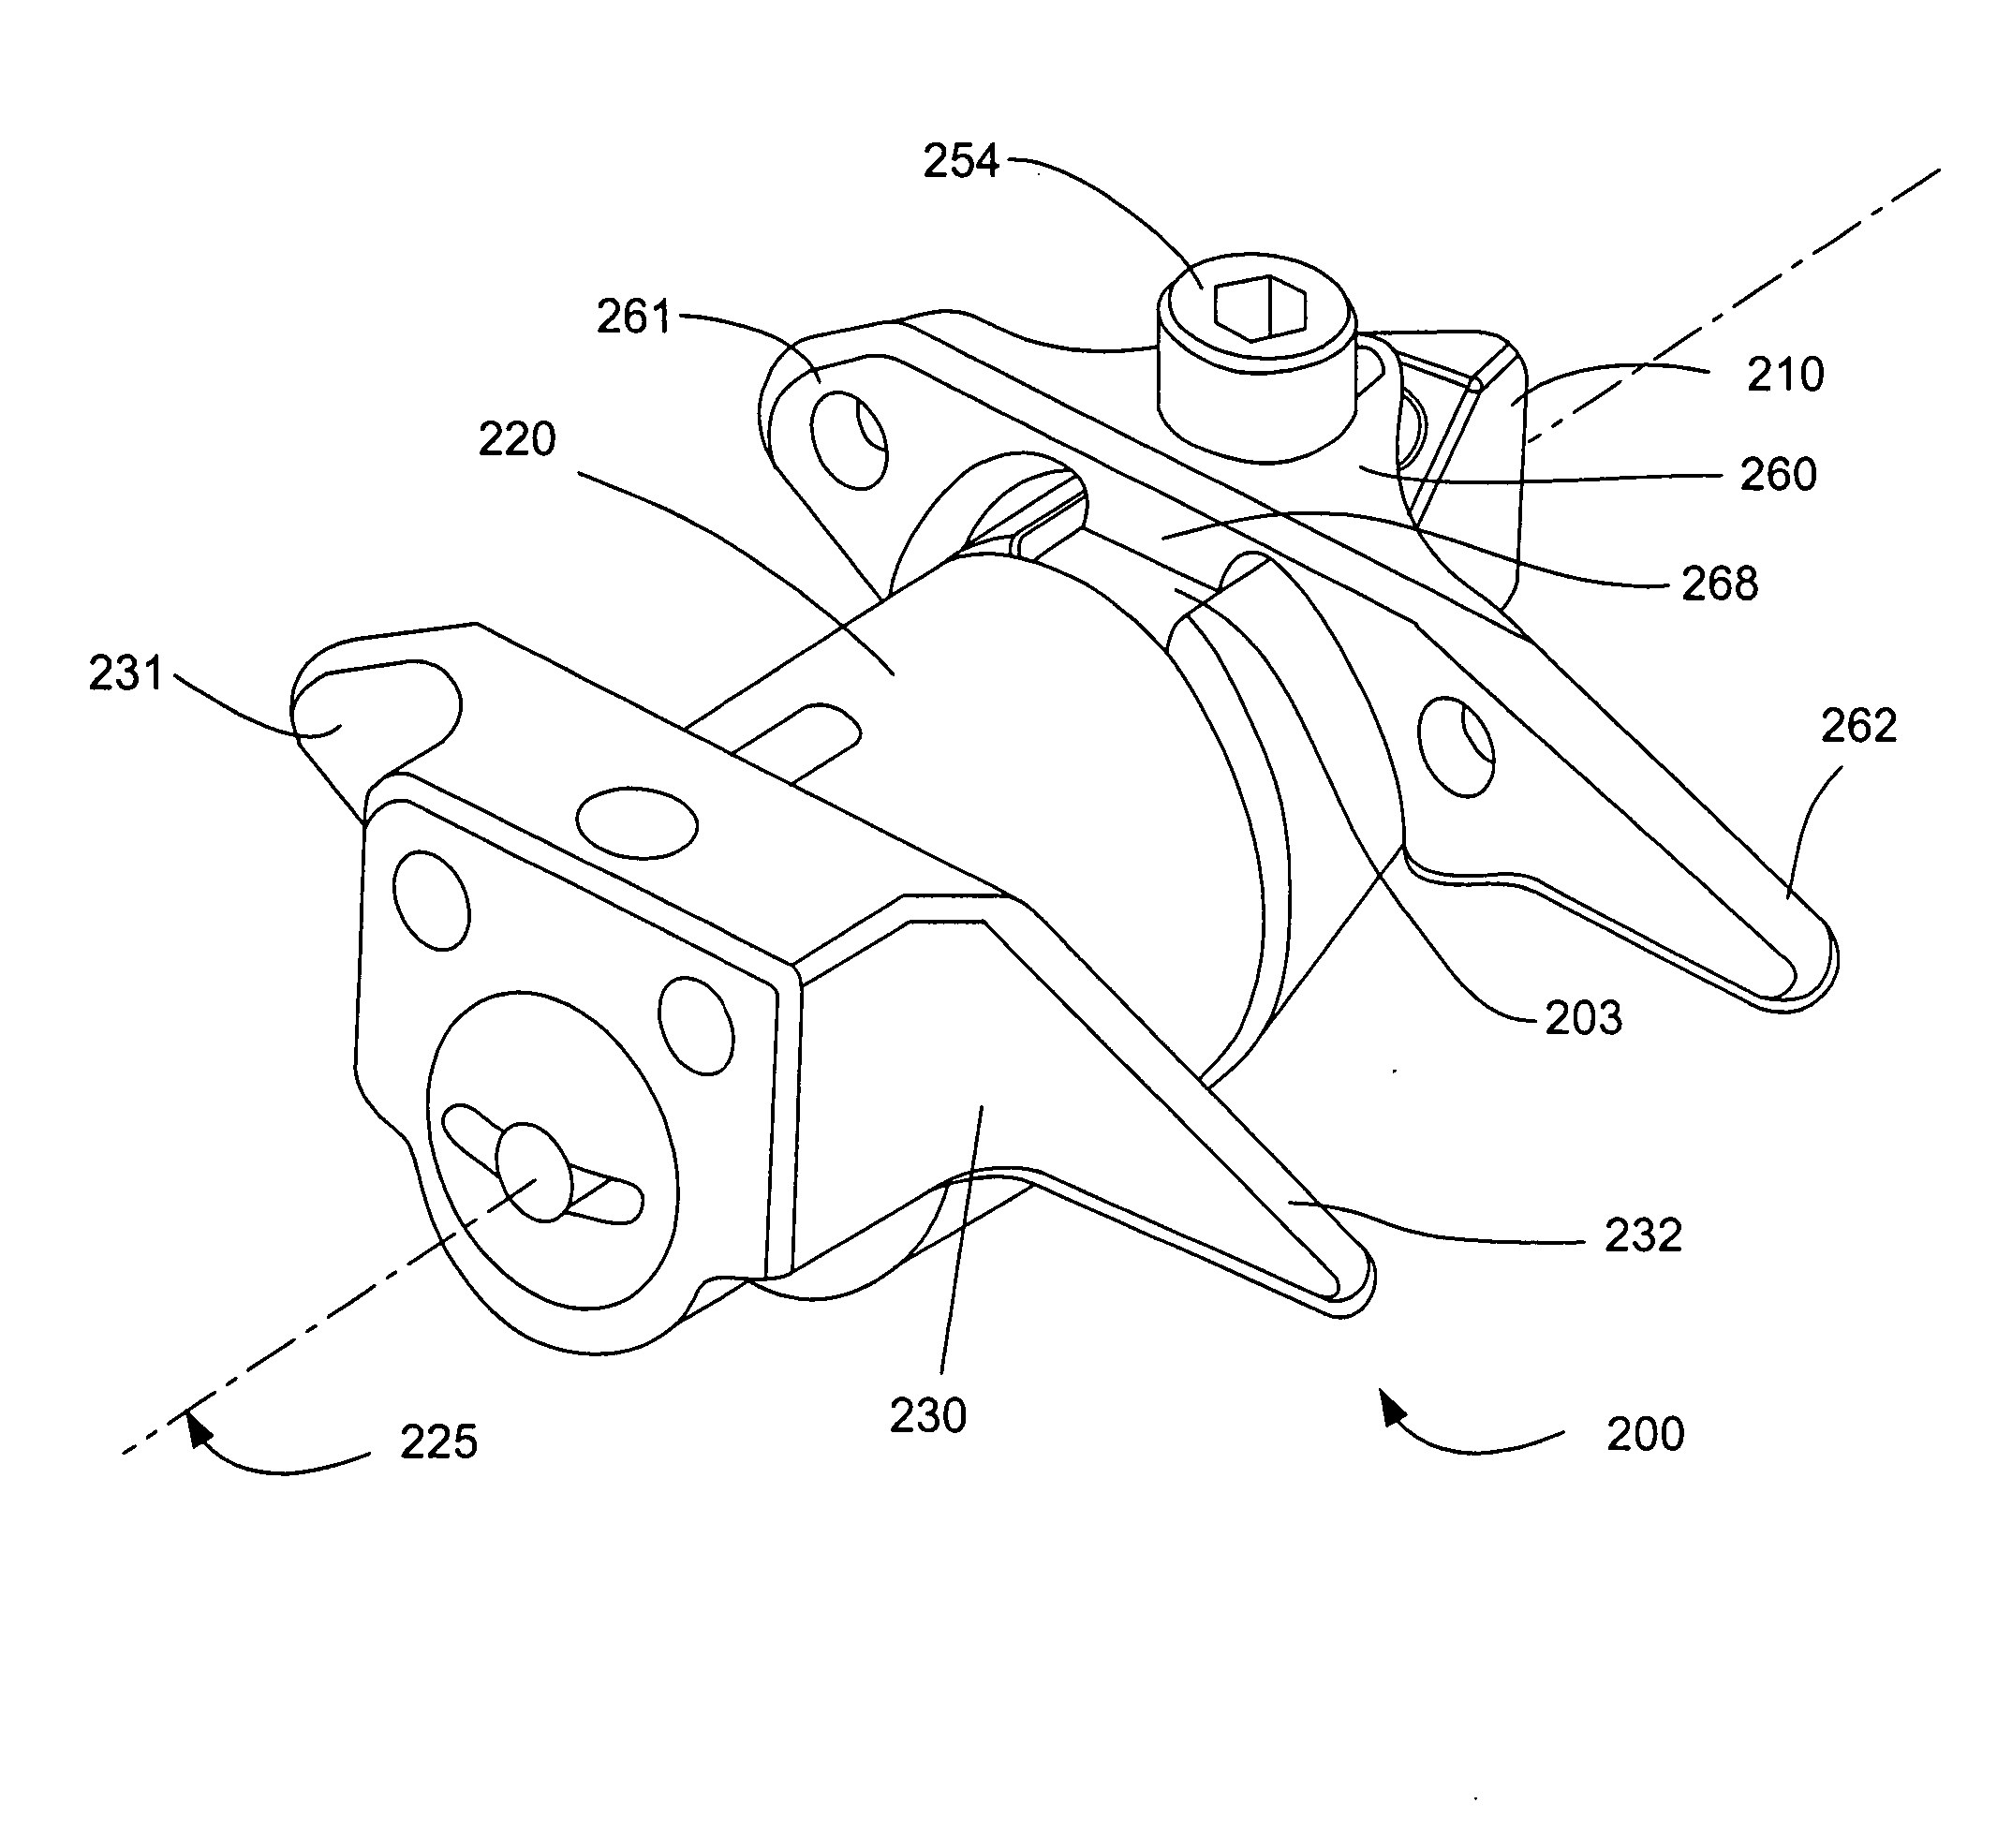 Interspinous process implant having deployable wing and method of implantation